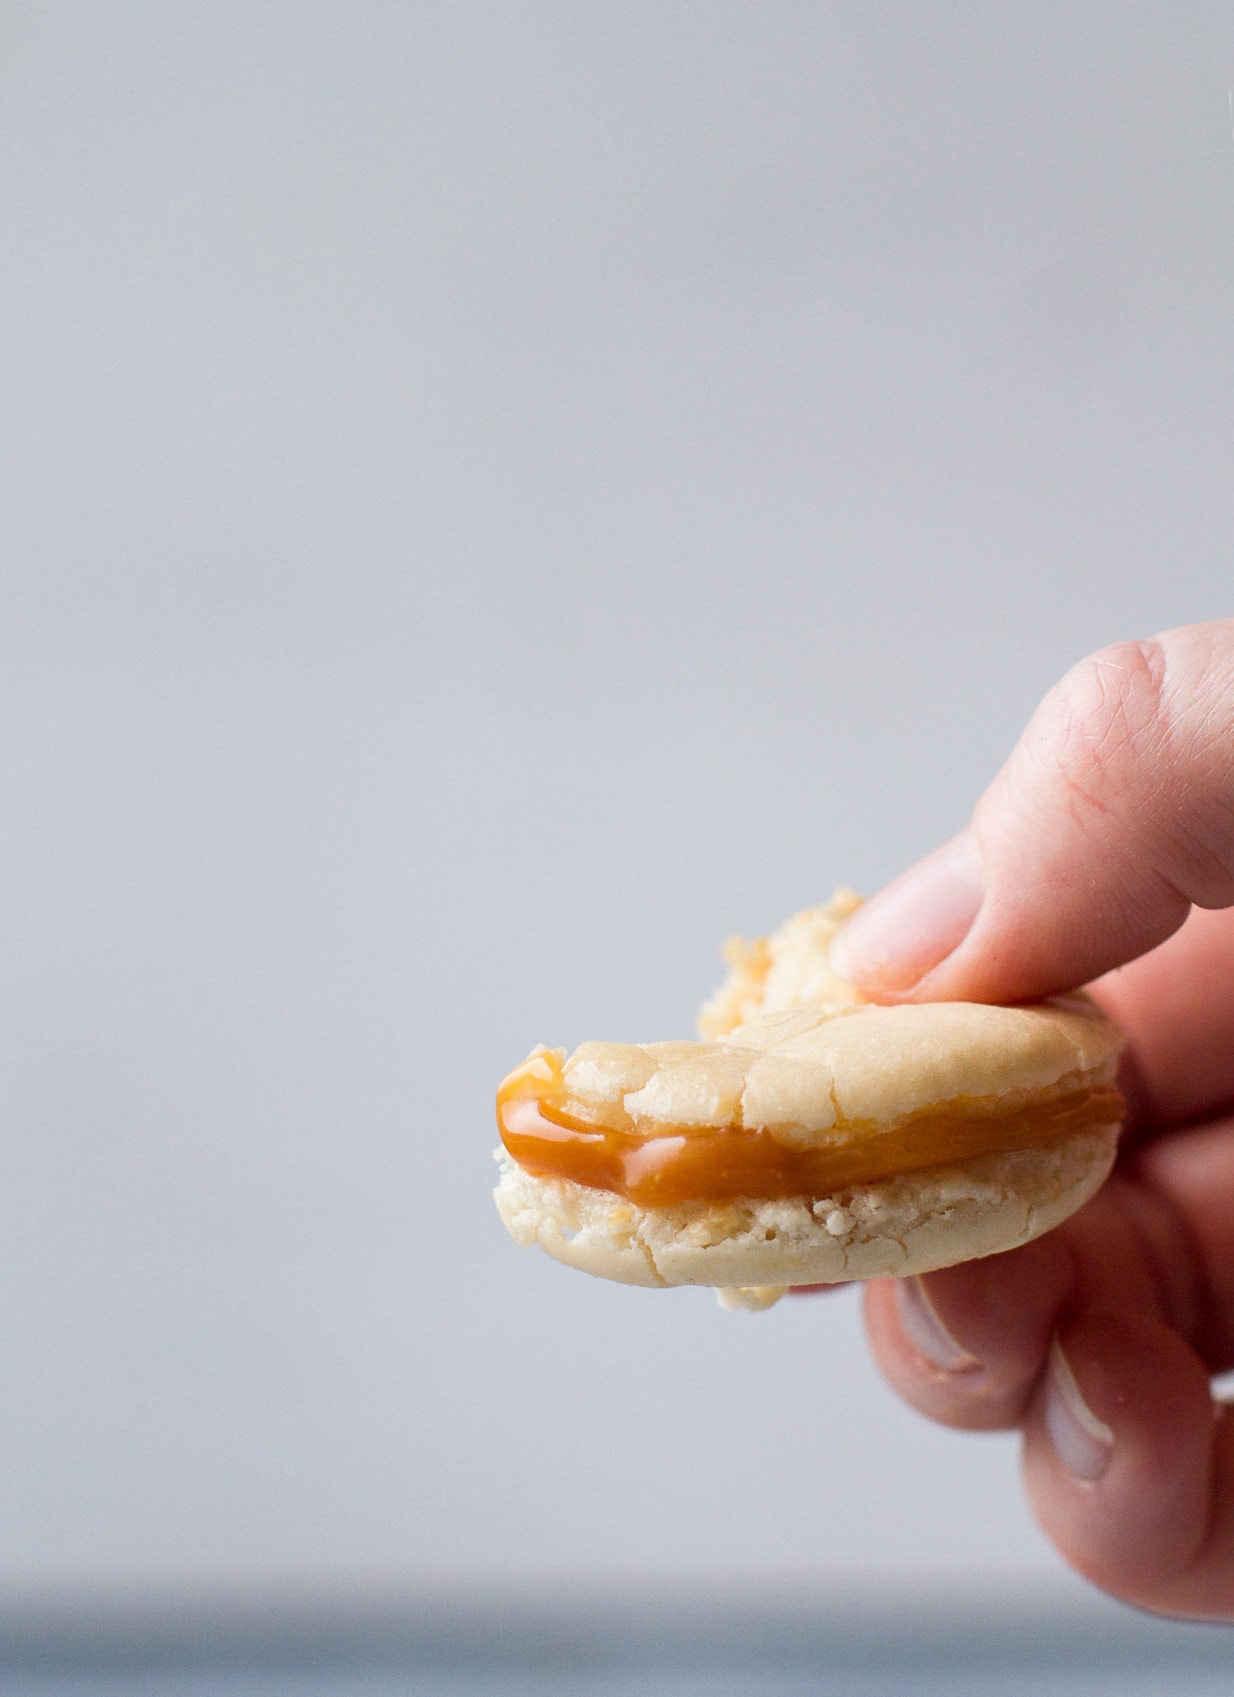 hand holding a salted caramel macaron taken a bite out of.